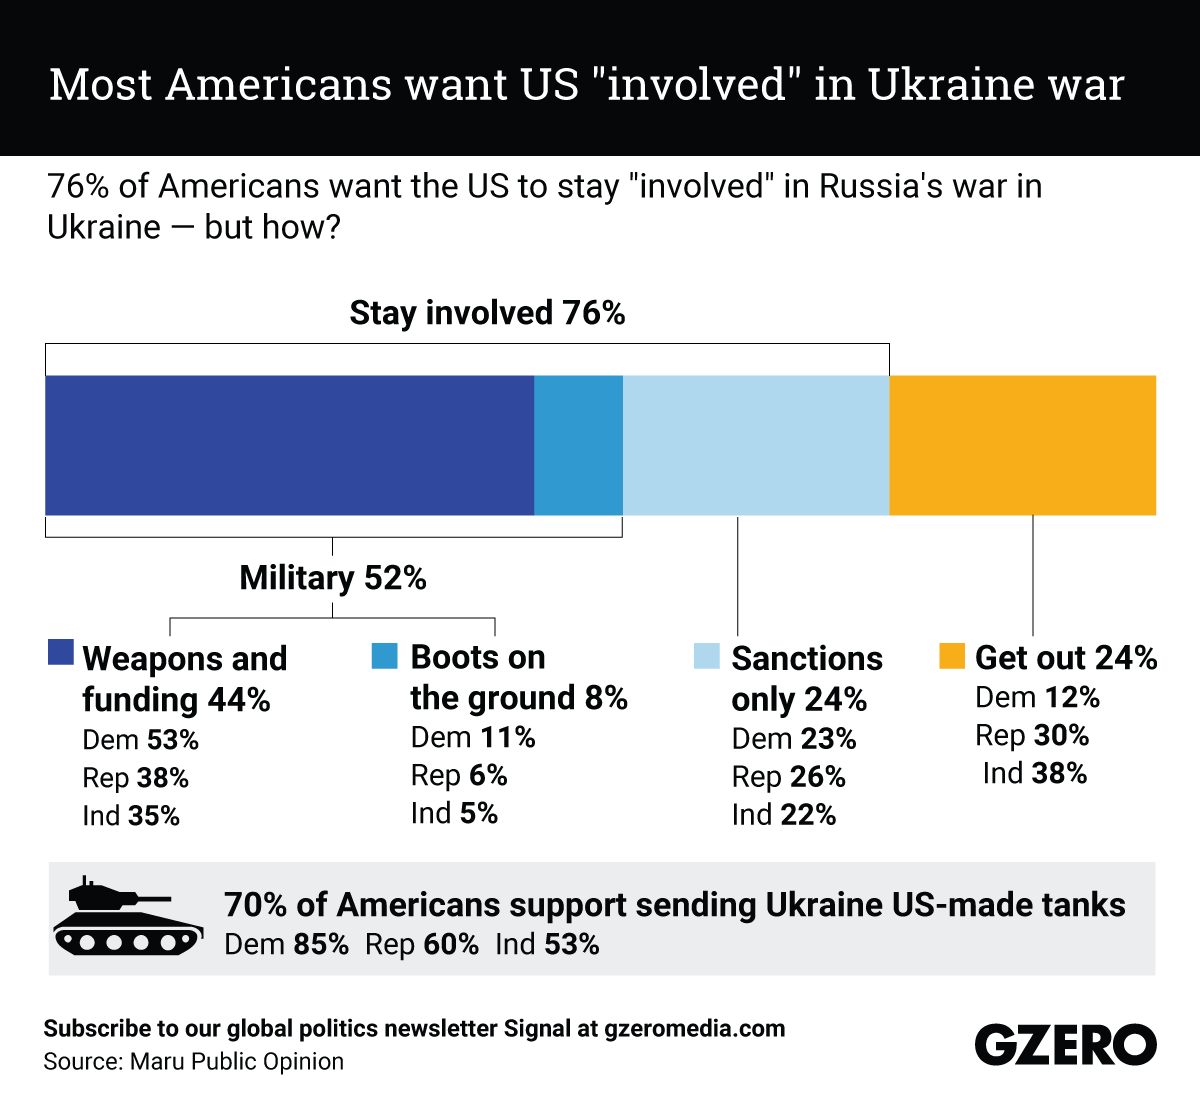 The Graphic Truth: Most Americans want US "involved" in Ukraine war